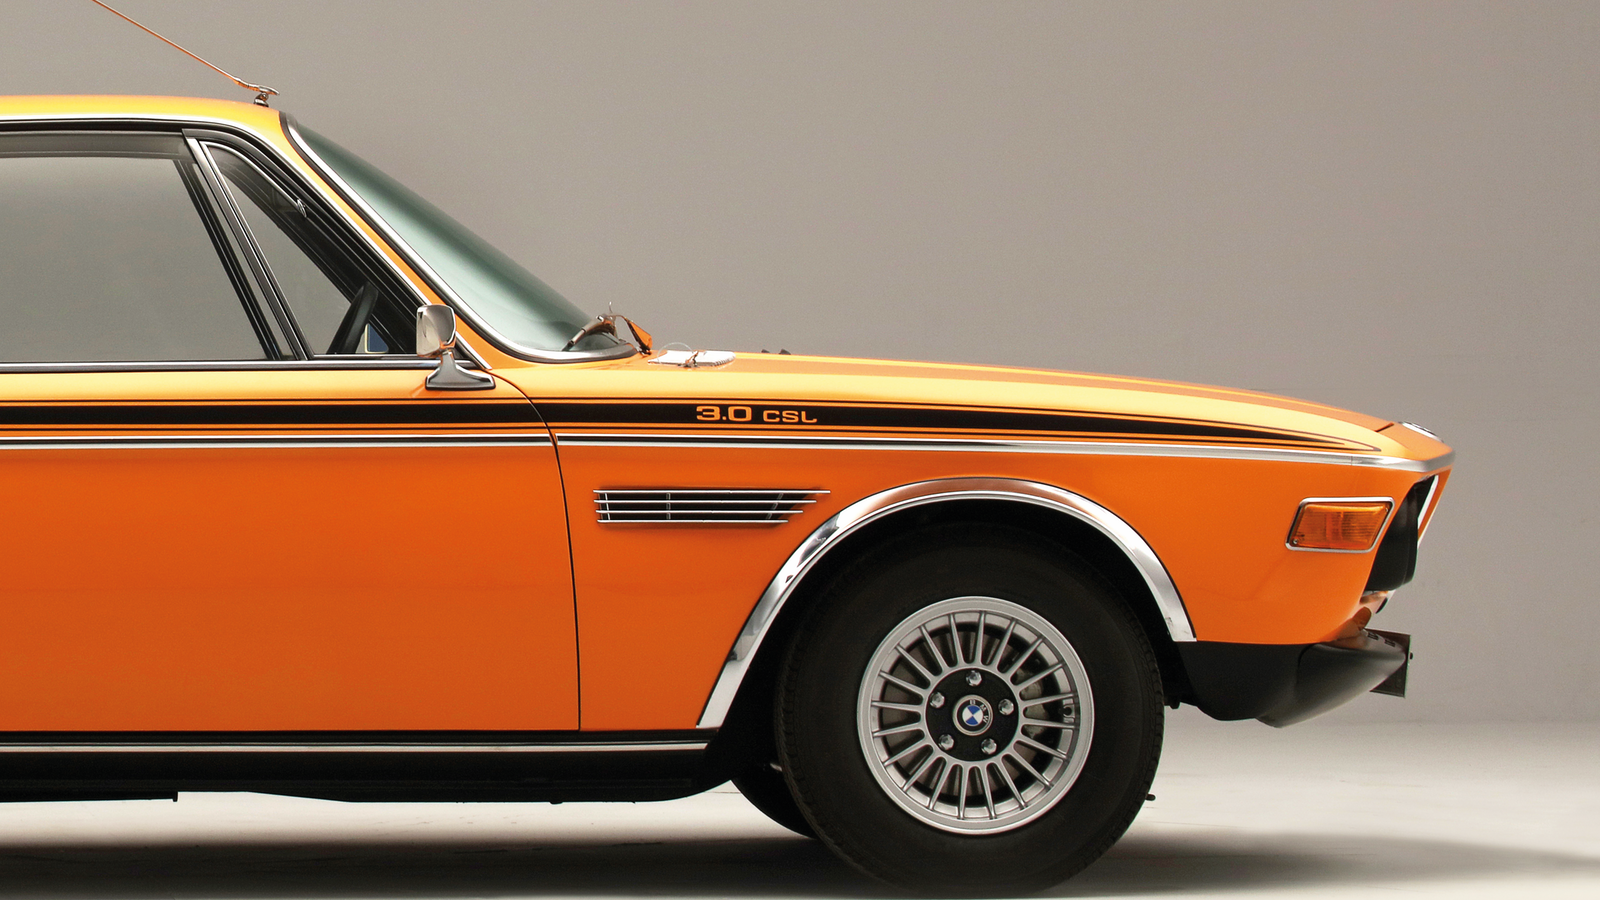 In pictures: the greatest BMW of all time